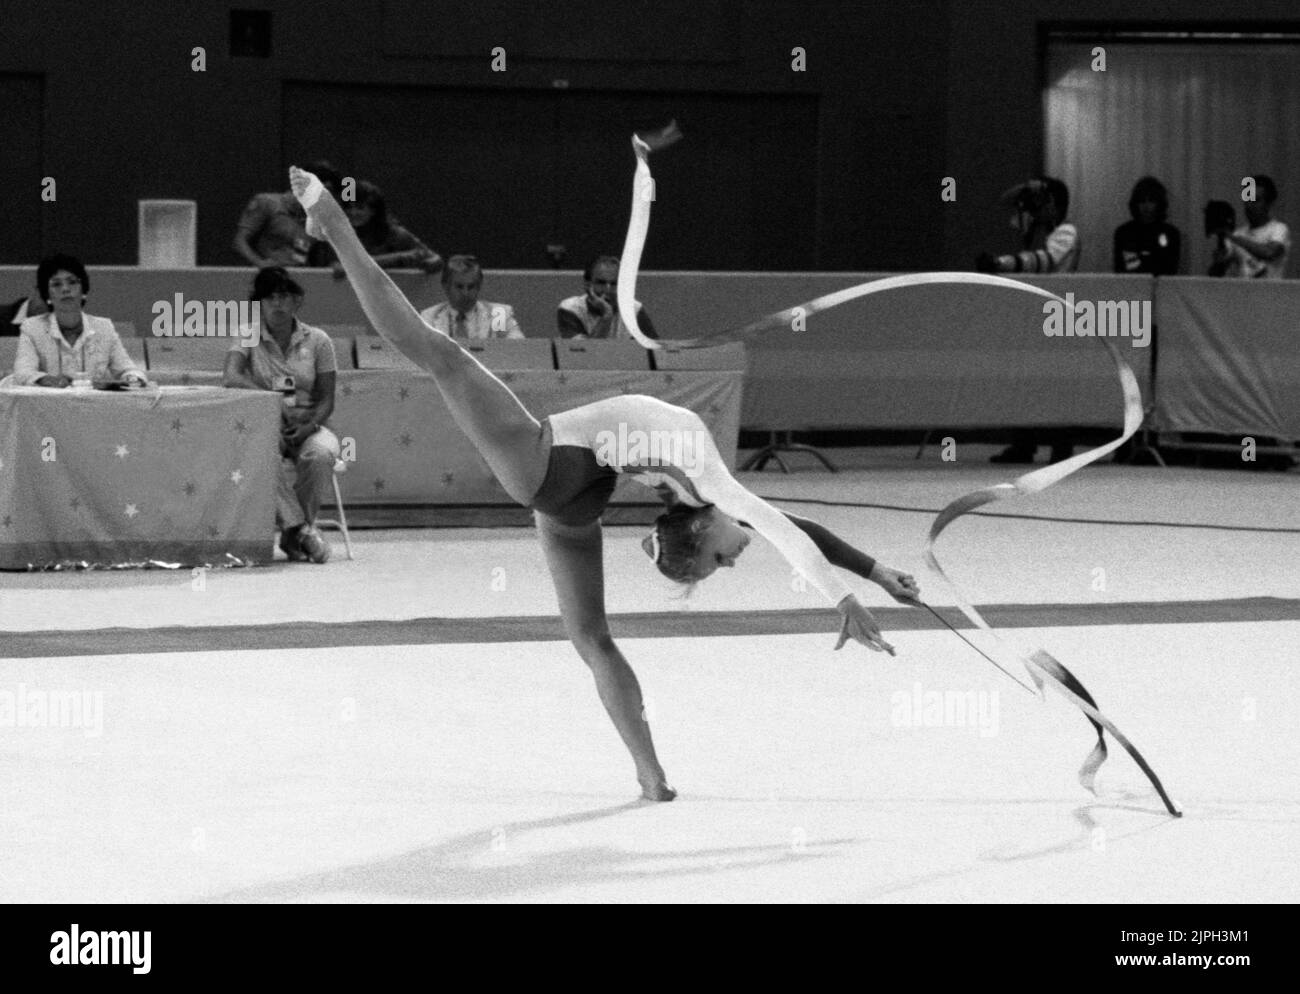 OLYMPIC SUMMER GAMES IN LOS ANGELES 1984VIKTORIA BENGTSSON Sweden perform in Rhythmic Gymnastics with  ribbon Stock Photo